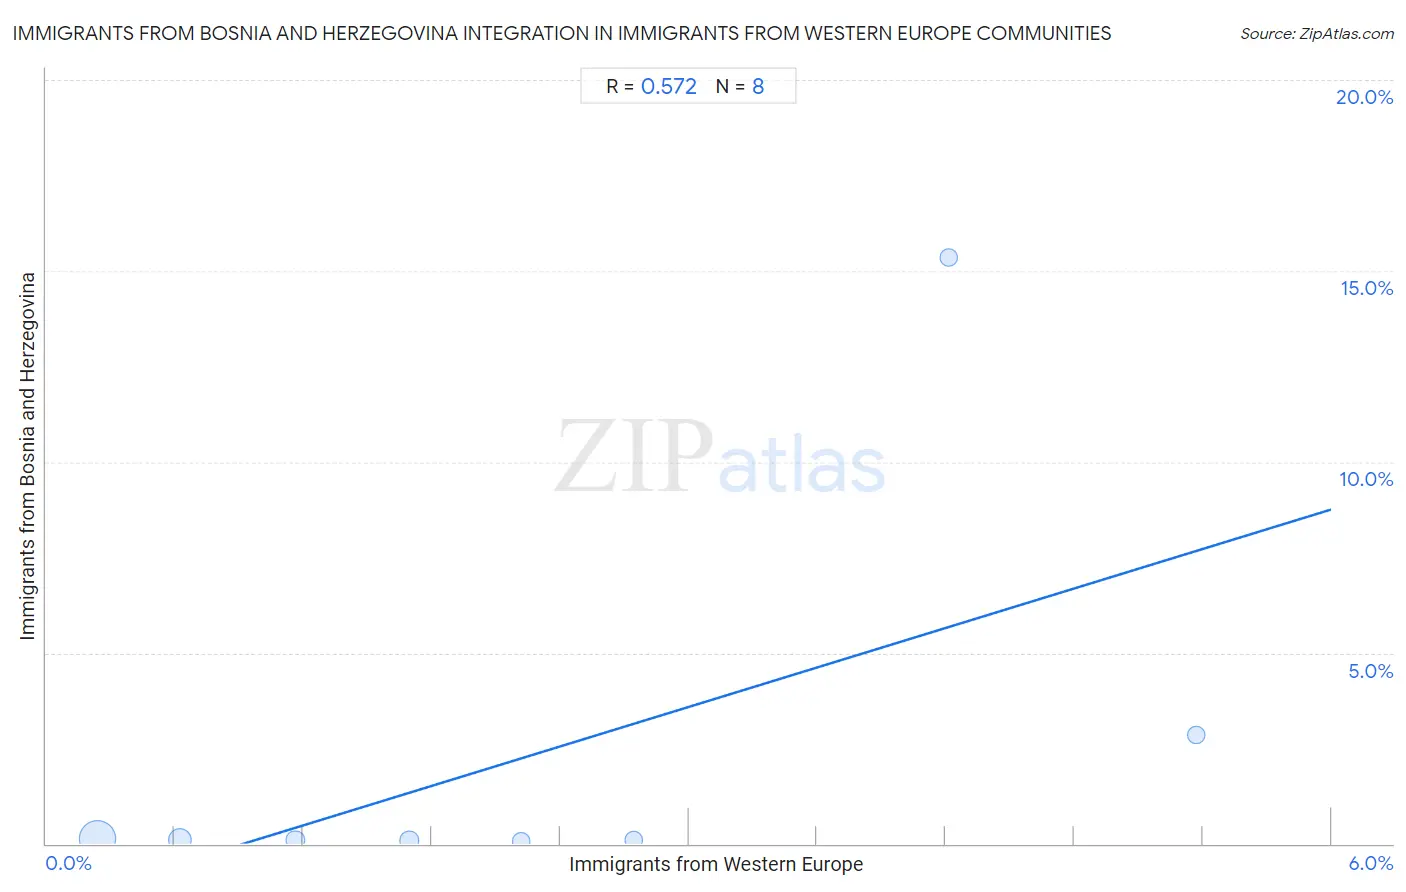 Immigrants from Western Europe Integration in Immigrants from Bosnia and Herzegovina Communities